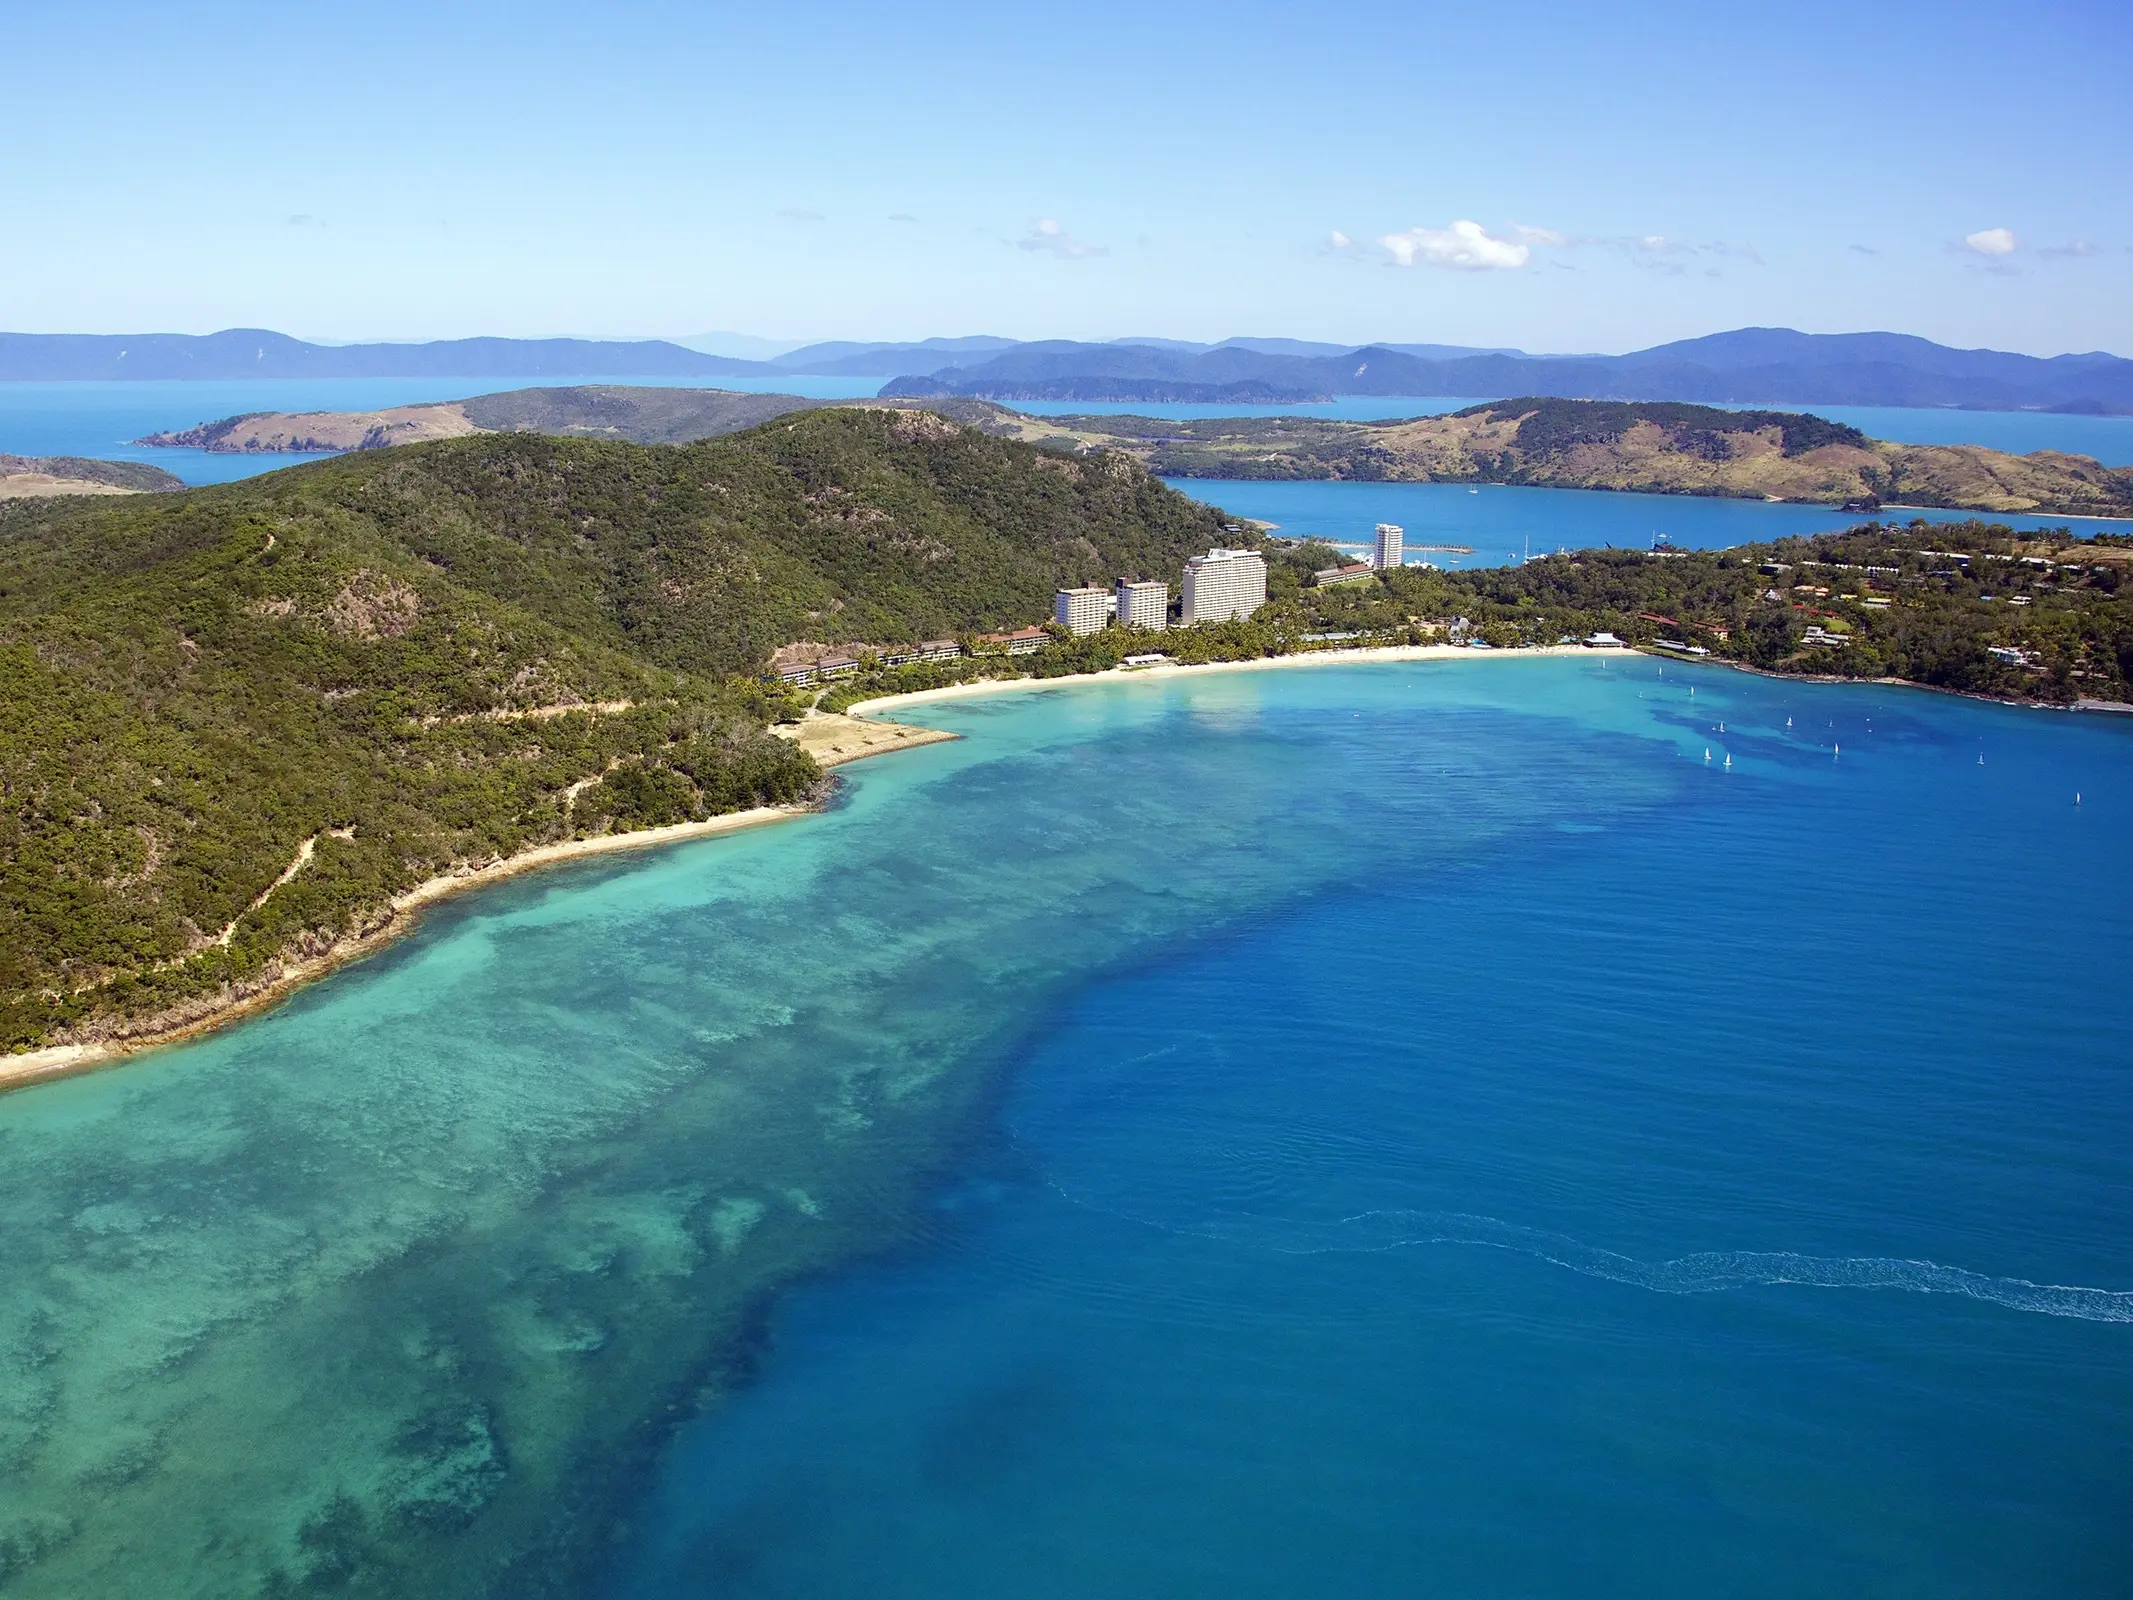 Aerial shot of foliage-covered Hamilton Island fringed with beaches and resorts, surrounded by bright blue water. Image credit: Shutterstock